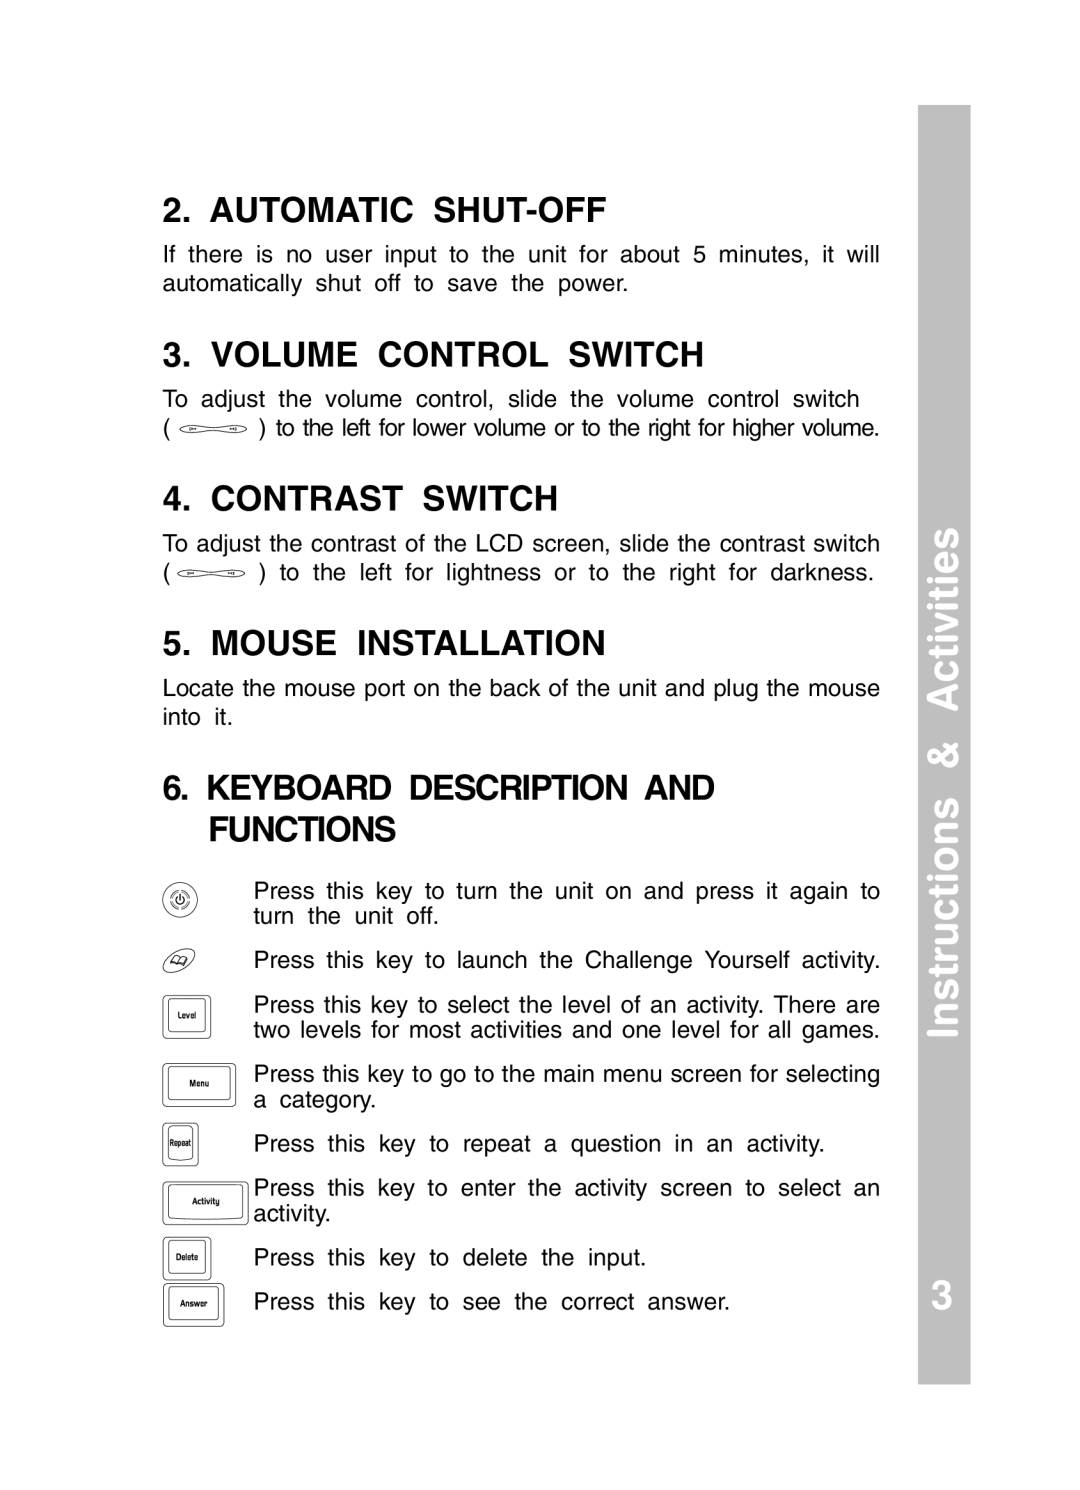 VTech 91-01256-043 user manual Automatic Shut-Off, Volume Control Switch, Contrast Switch, Mouse Installation 